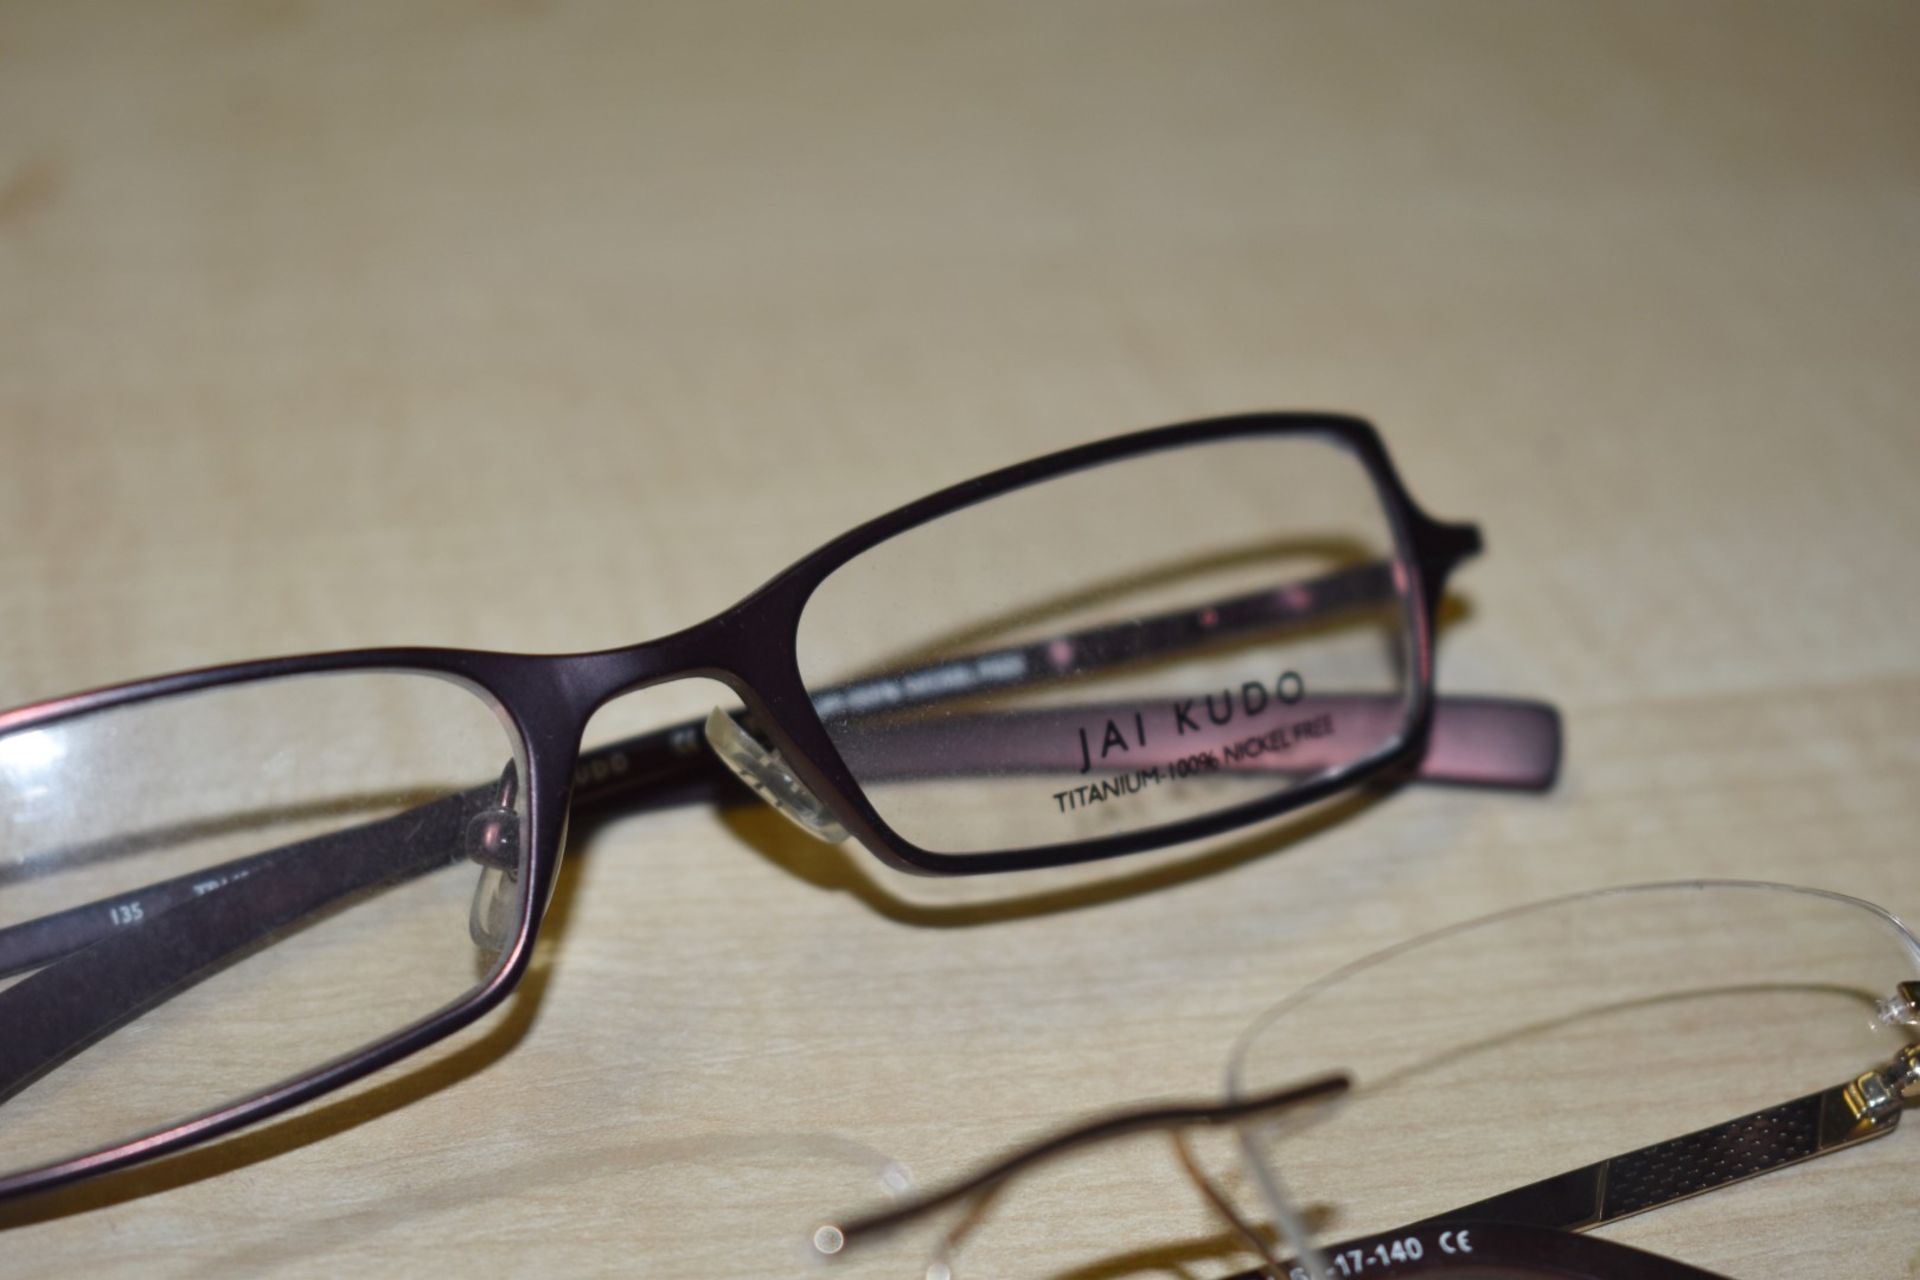 6 x Assorted Pairs of Designer Spectacle Eye Glasses - Ex Display Stock - Brands Include Jeff Banks, - Image 6 of 10